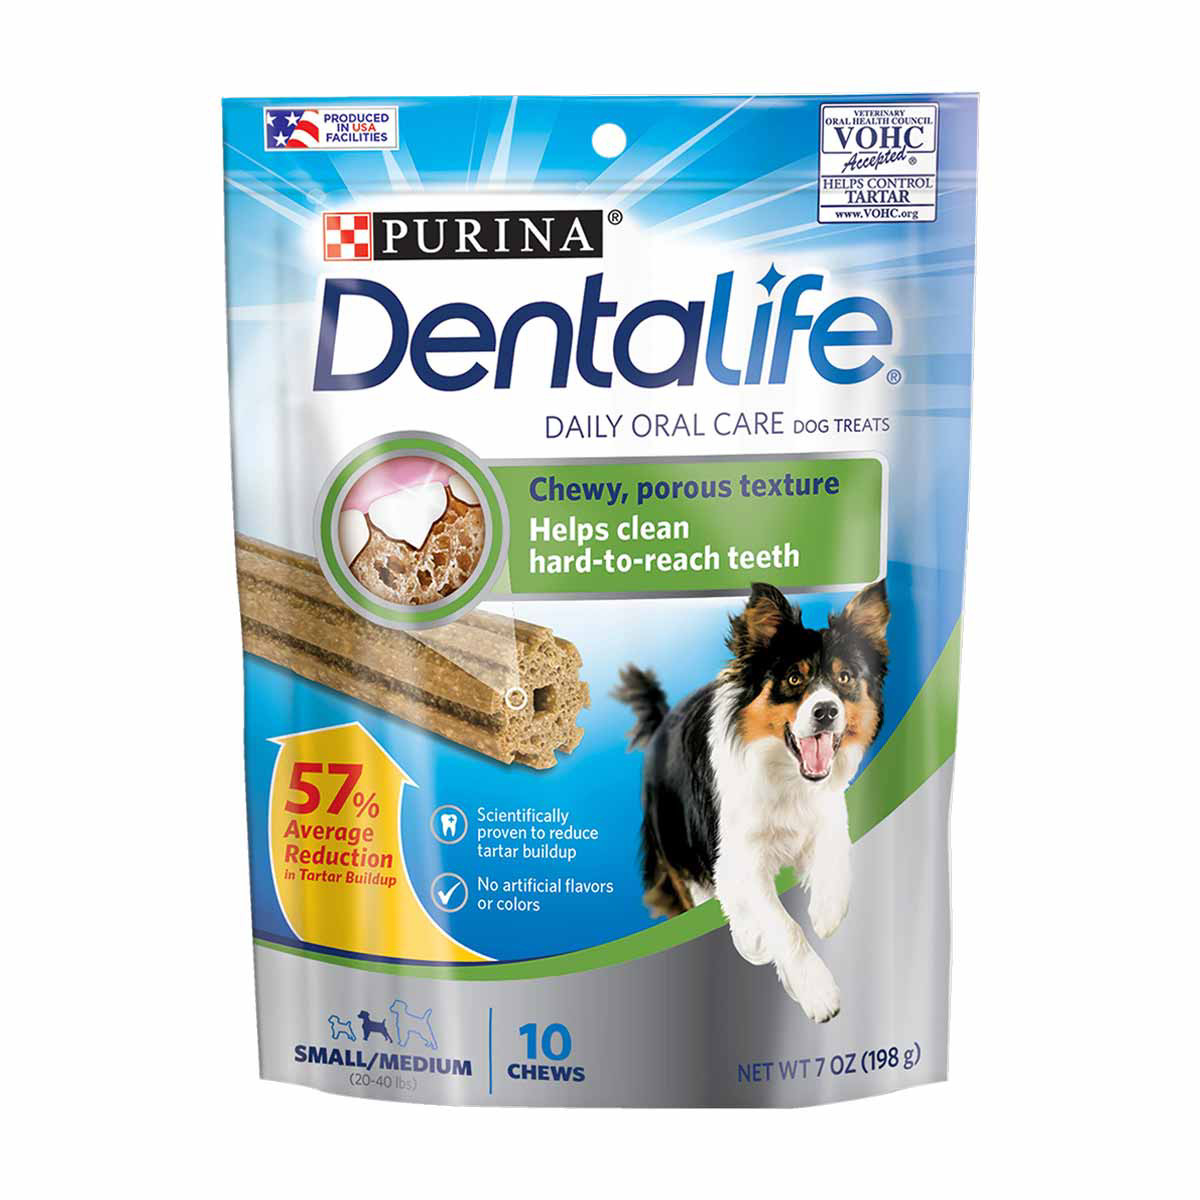 Purina Dentalife Daily Oral Care Chicken Flavor Dog Treats, 7.0 oz, 10 Count